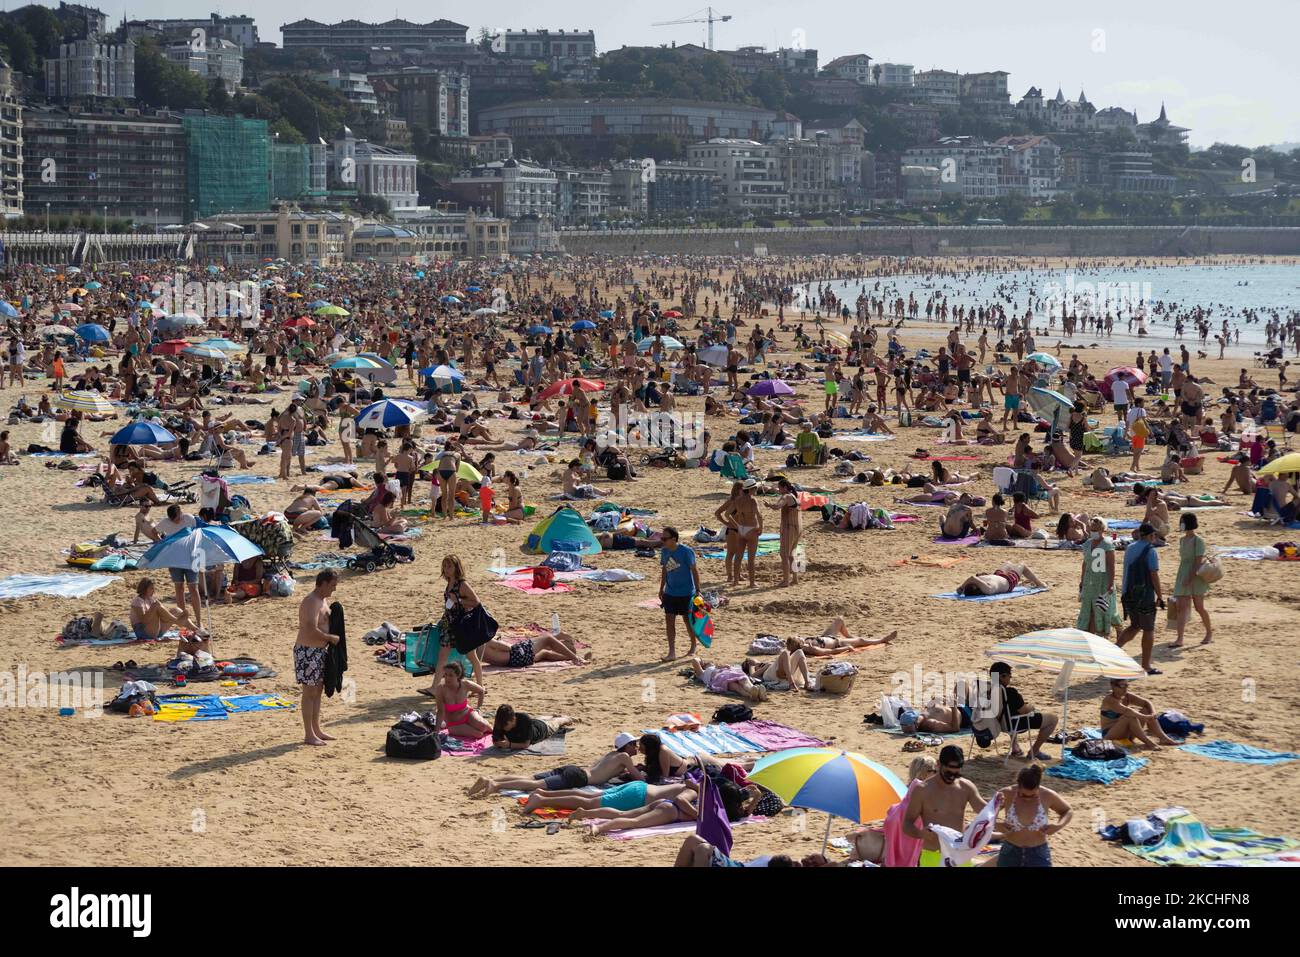 View of La Concha beach in San Sebastian crowded of people, on July 20, 2021. Beachgoers have gathered at the beaches on San Sebastian, Spain at temperatures of almost 30 degrees. Many tourists enjoy sun, sand, waves and sea at the beaches of Spain. (Photo by Manuel Balles/NurPhoto) Stock Photo